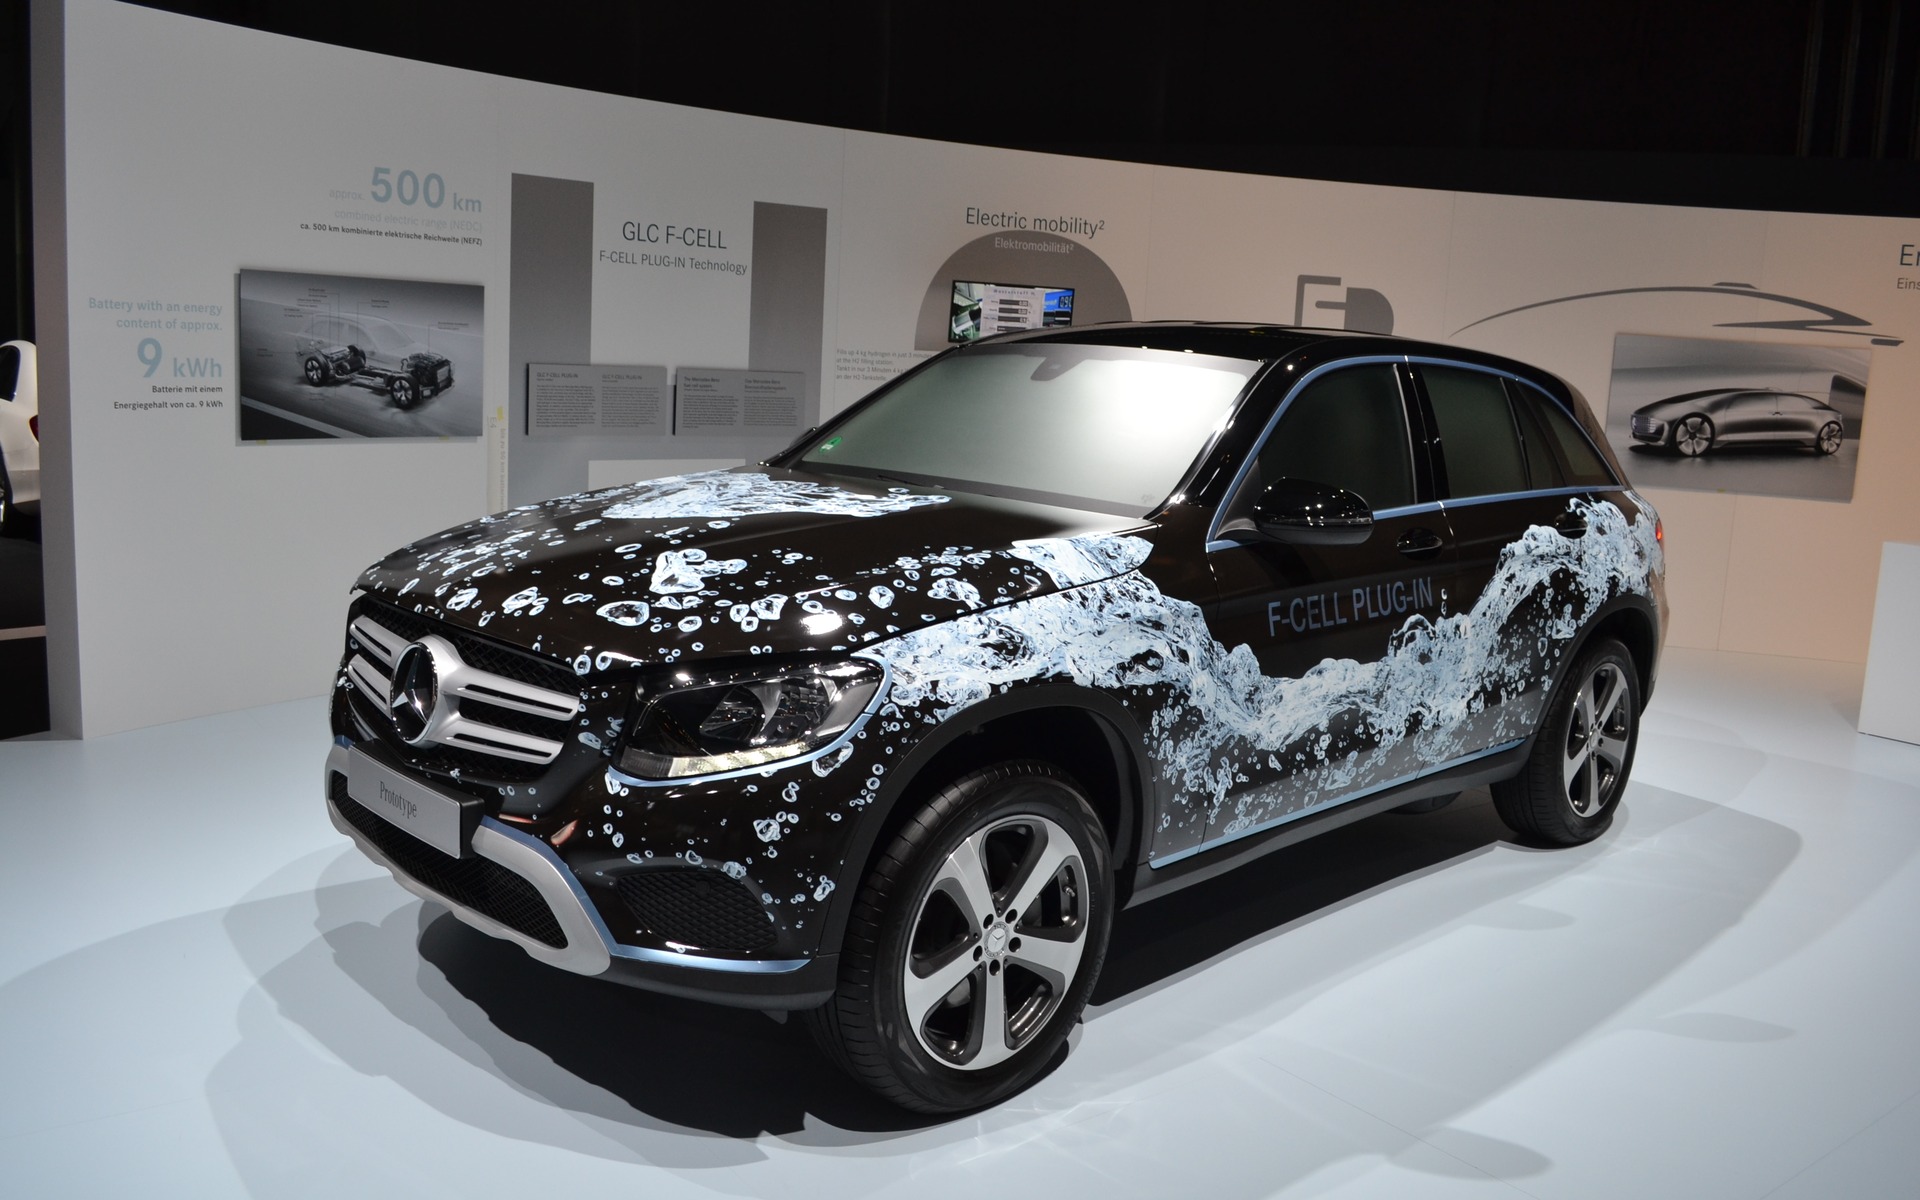 Le Mercedes-Benz GLC Fuell Cell